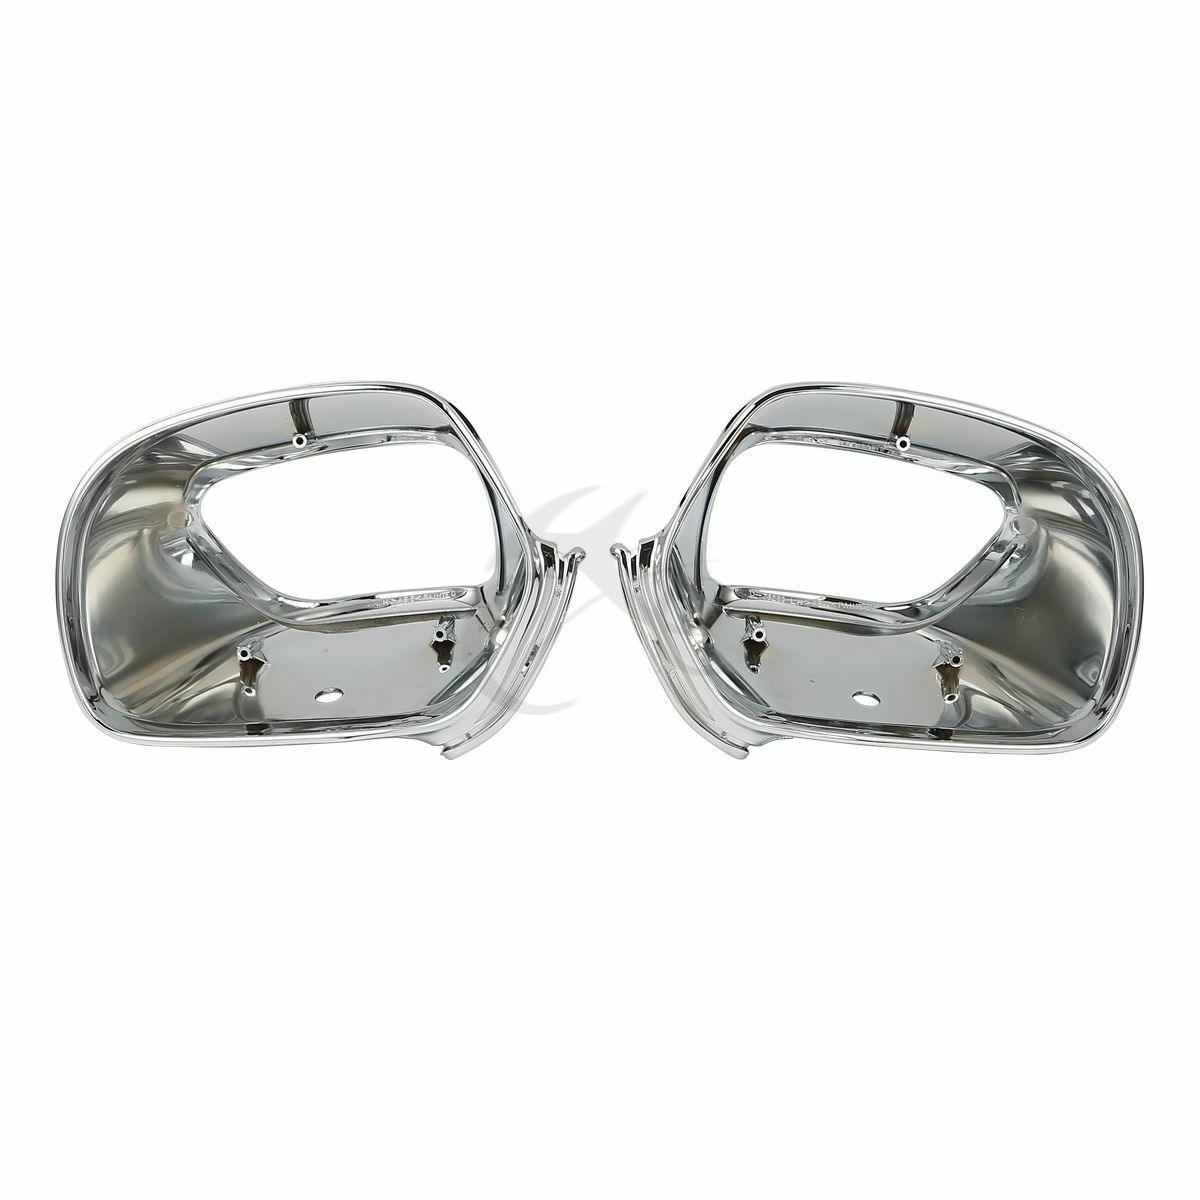 Chrome Rear View Mirrors Cover Fit For Honda GL1800 Goldwing 1800 2001-2017 - Moto Life Products